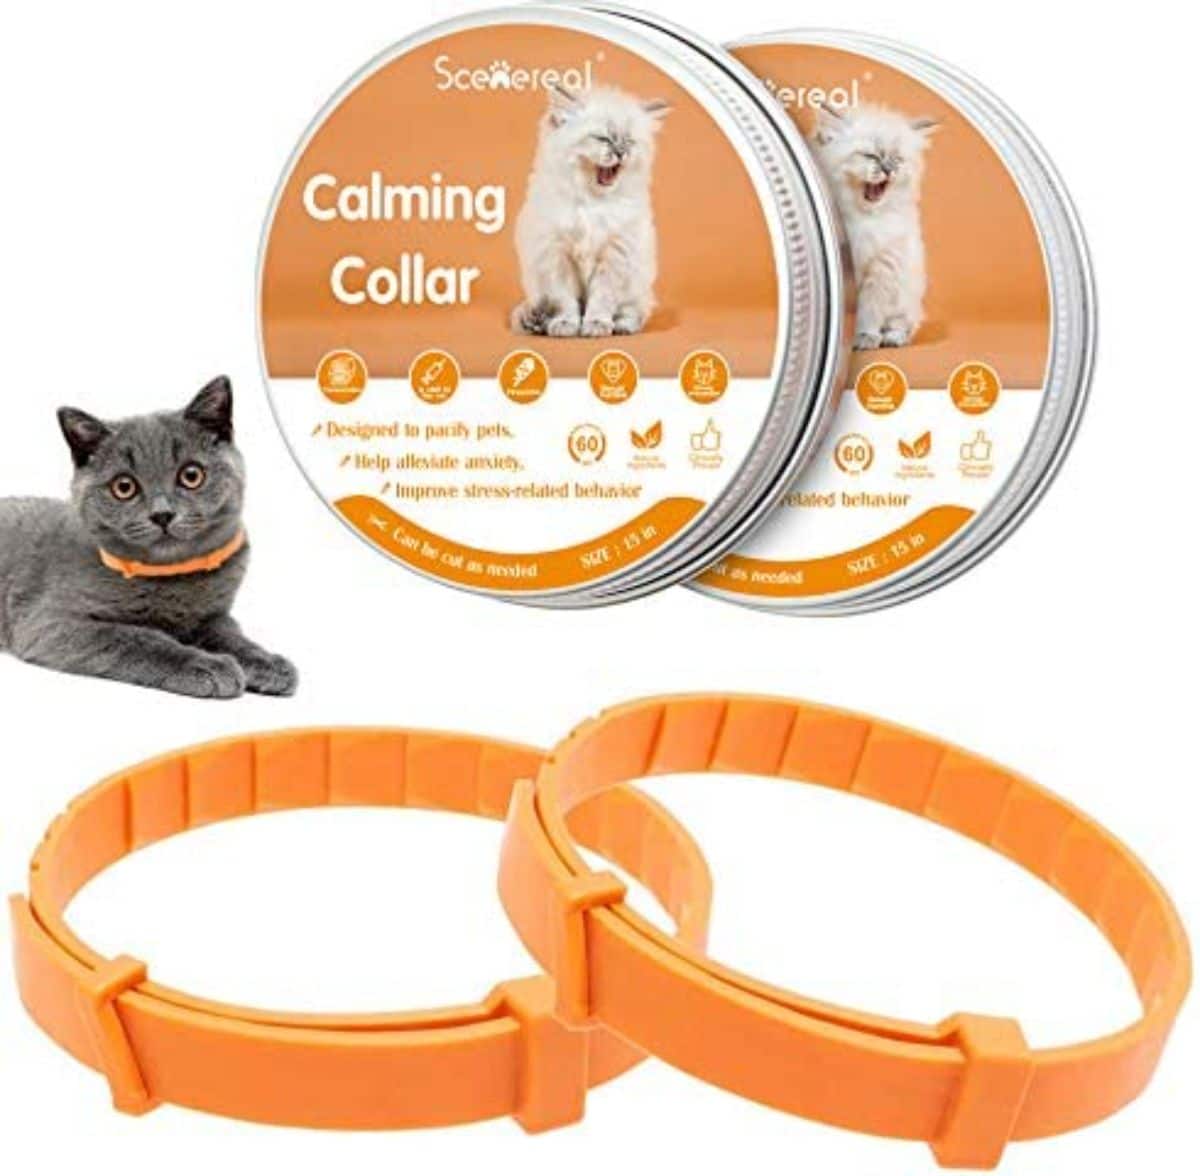 SCENEREAL Calming Collar for Cats